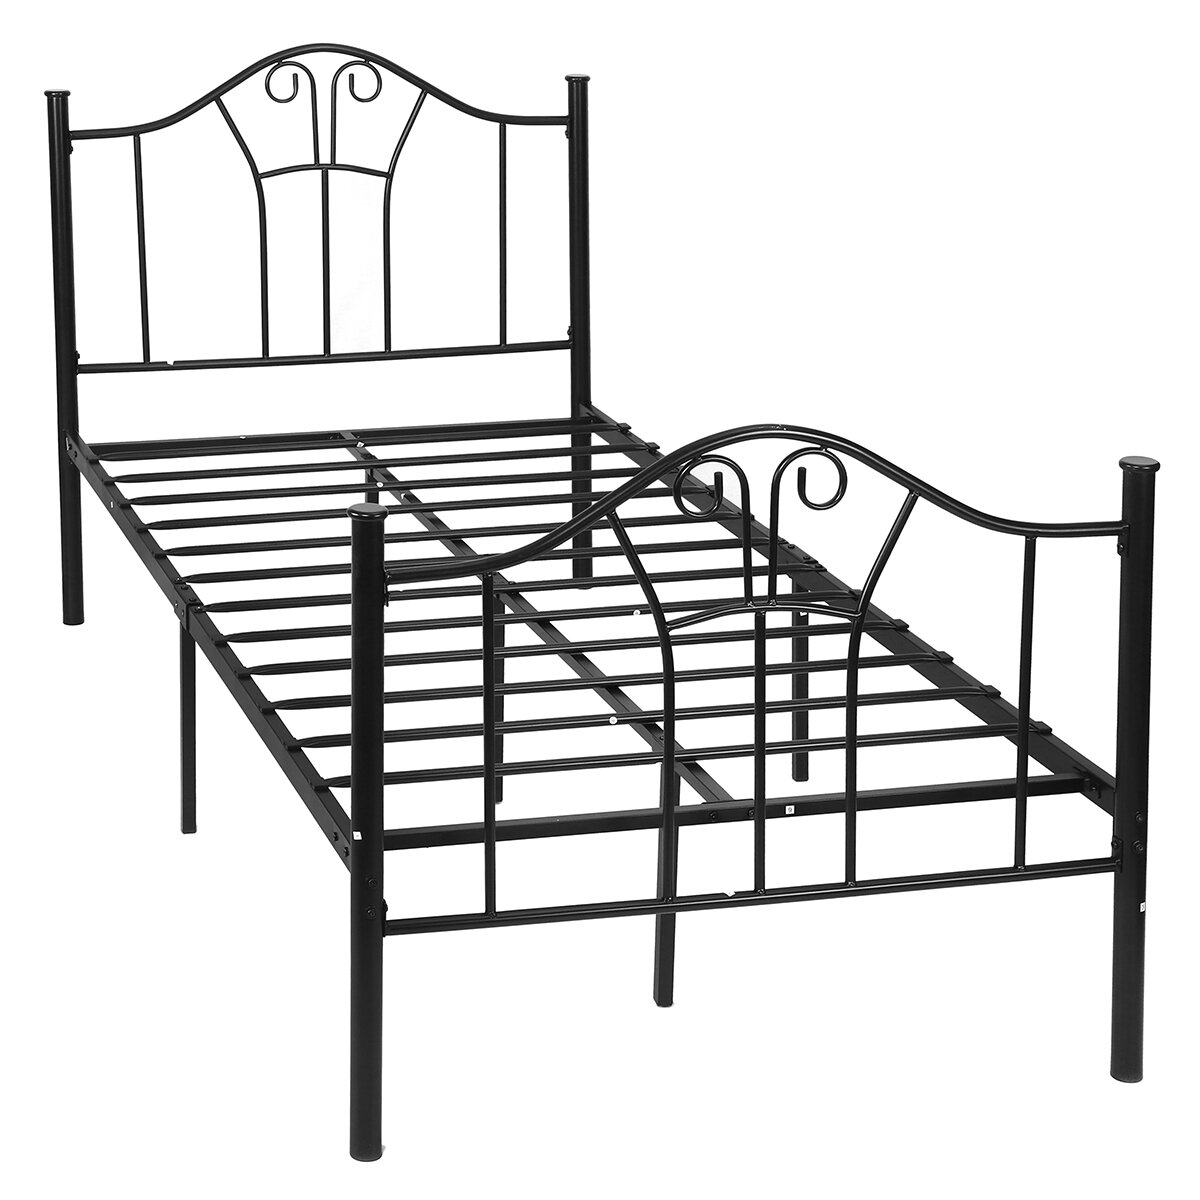 

Lusimo Twin Curved Metal Bed Frame Mattress Unique Design Platform Foundation Headboard Footboard No Box Spring Needed